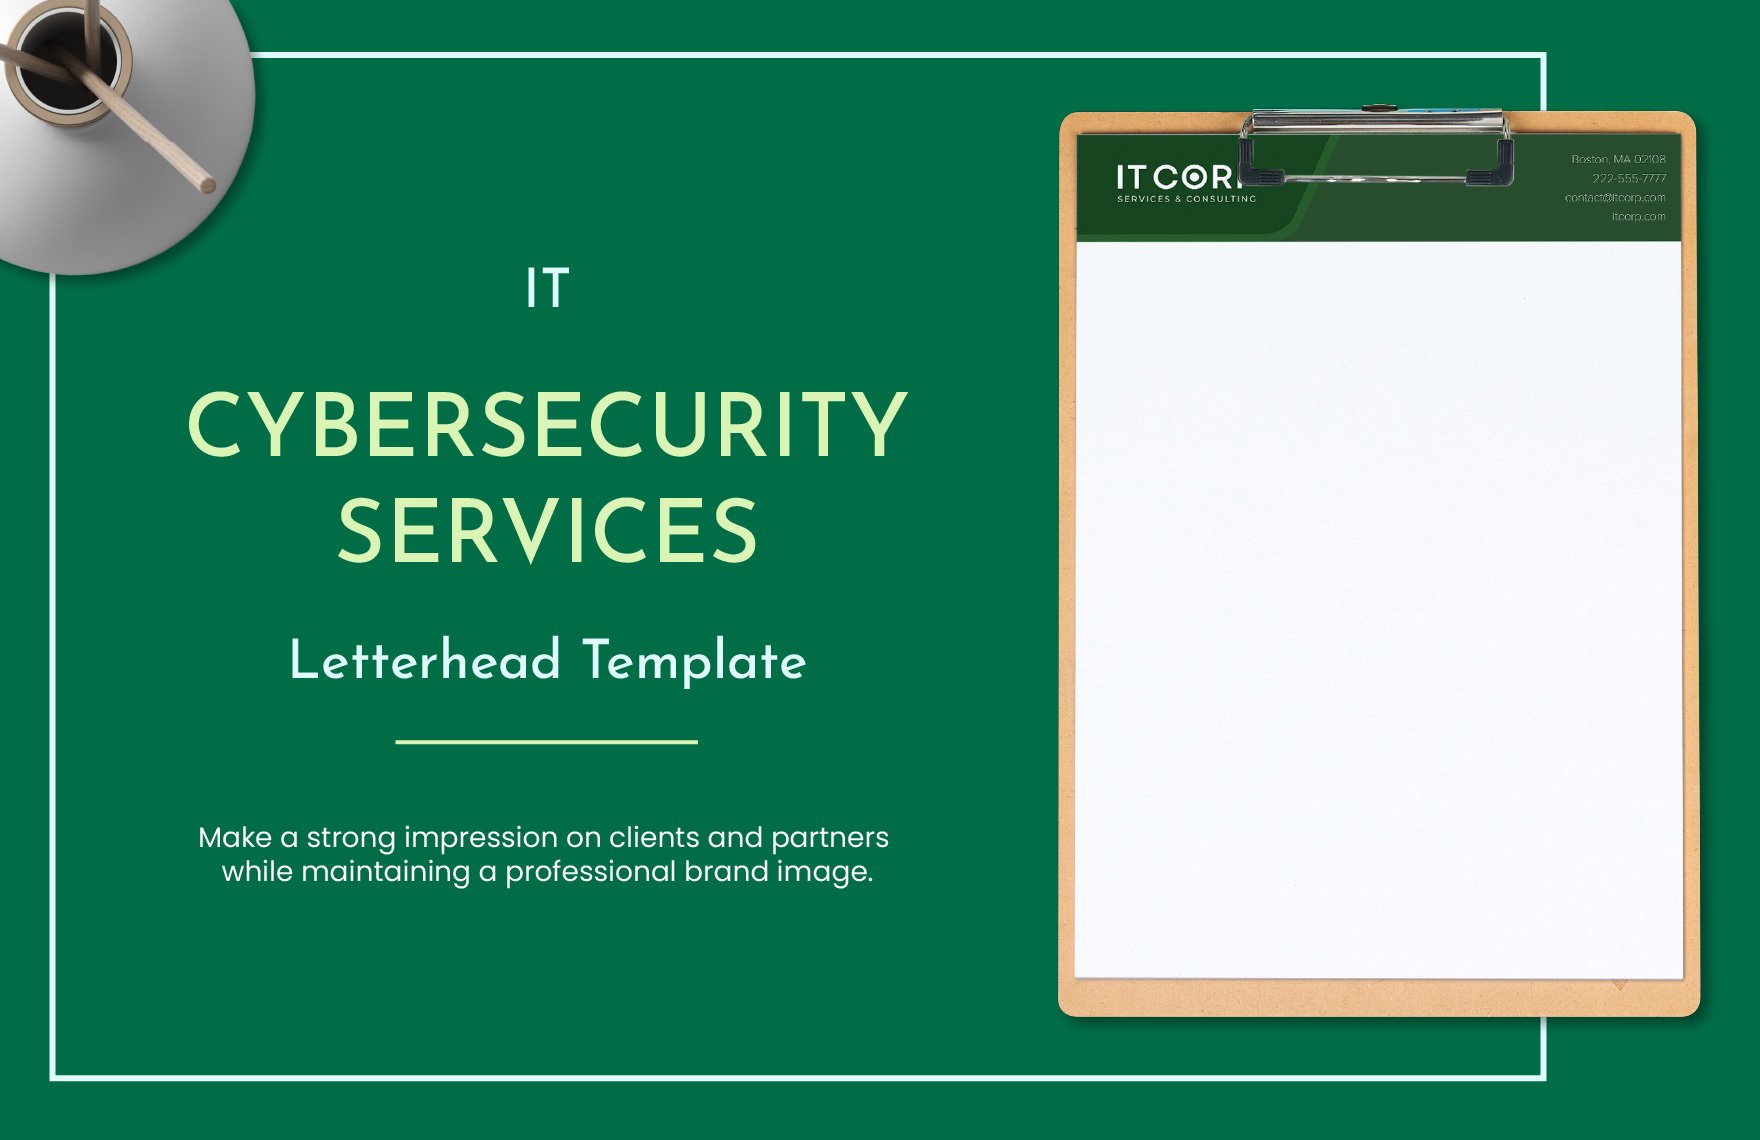 IT Cybersecurity Services Letterhead Template